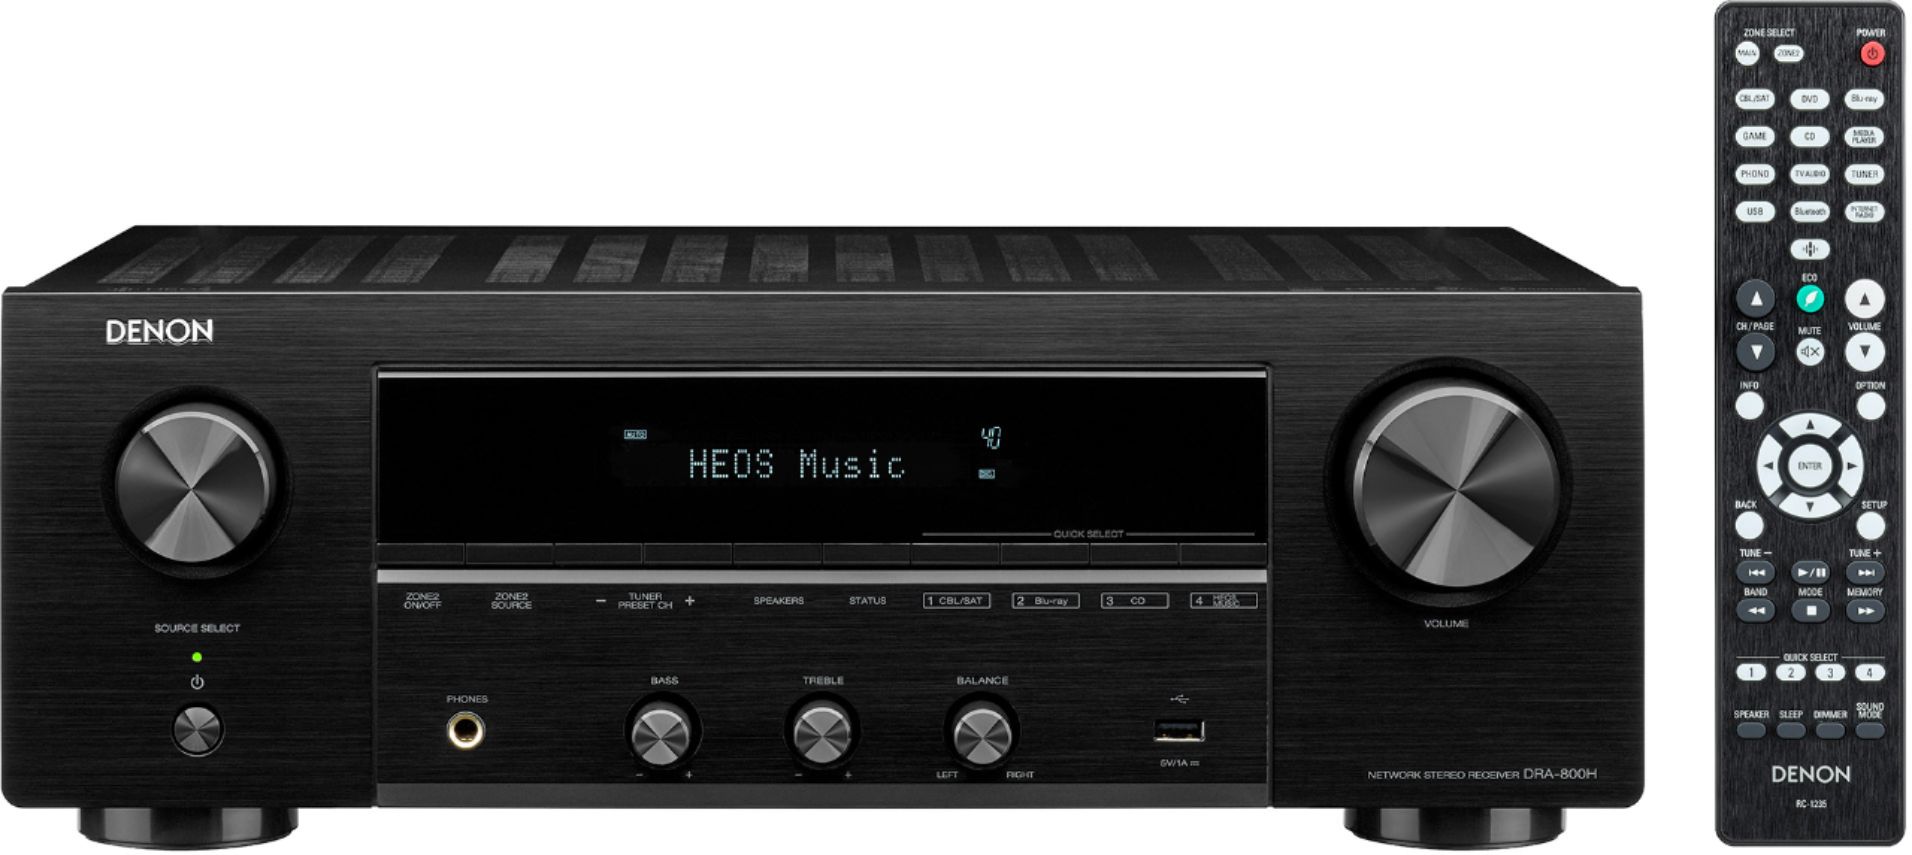 Denon DRA-800H 2-Channel Stereo Network Receiver for Home Theater | Hi-Fi Amplification | Connects to All Audio Sources - Black